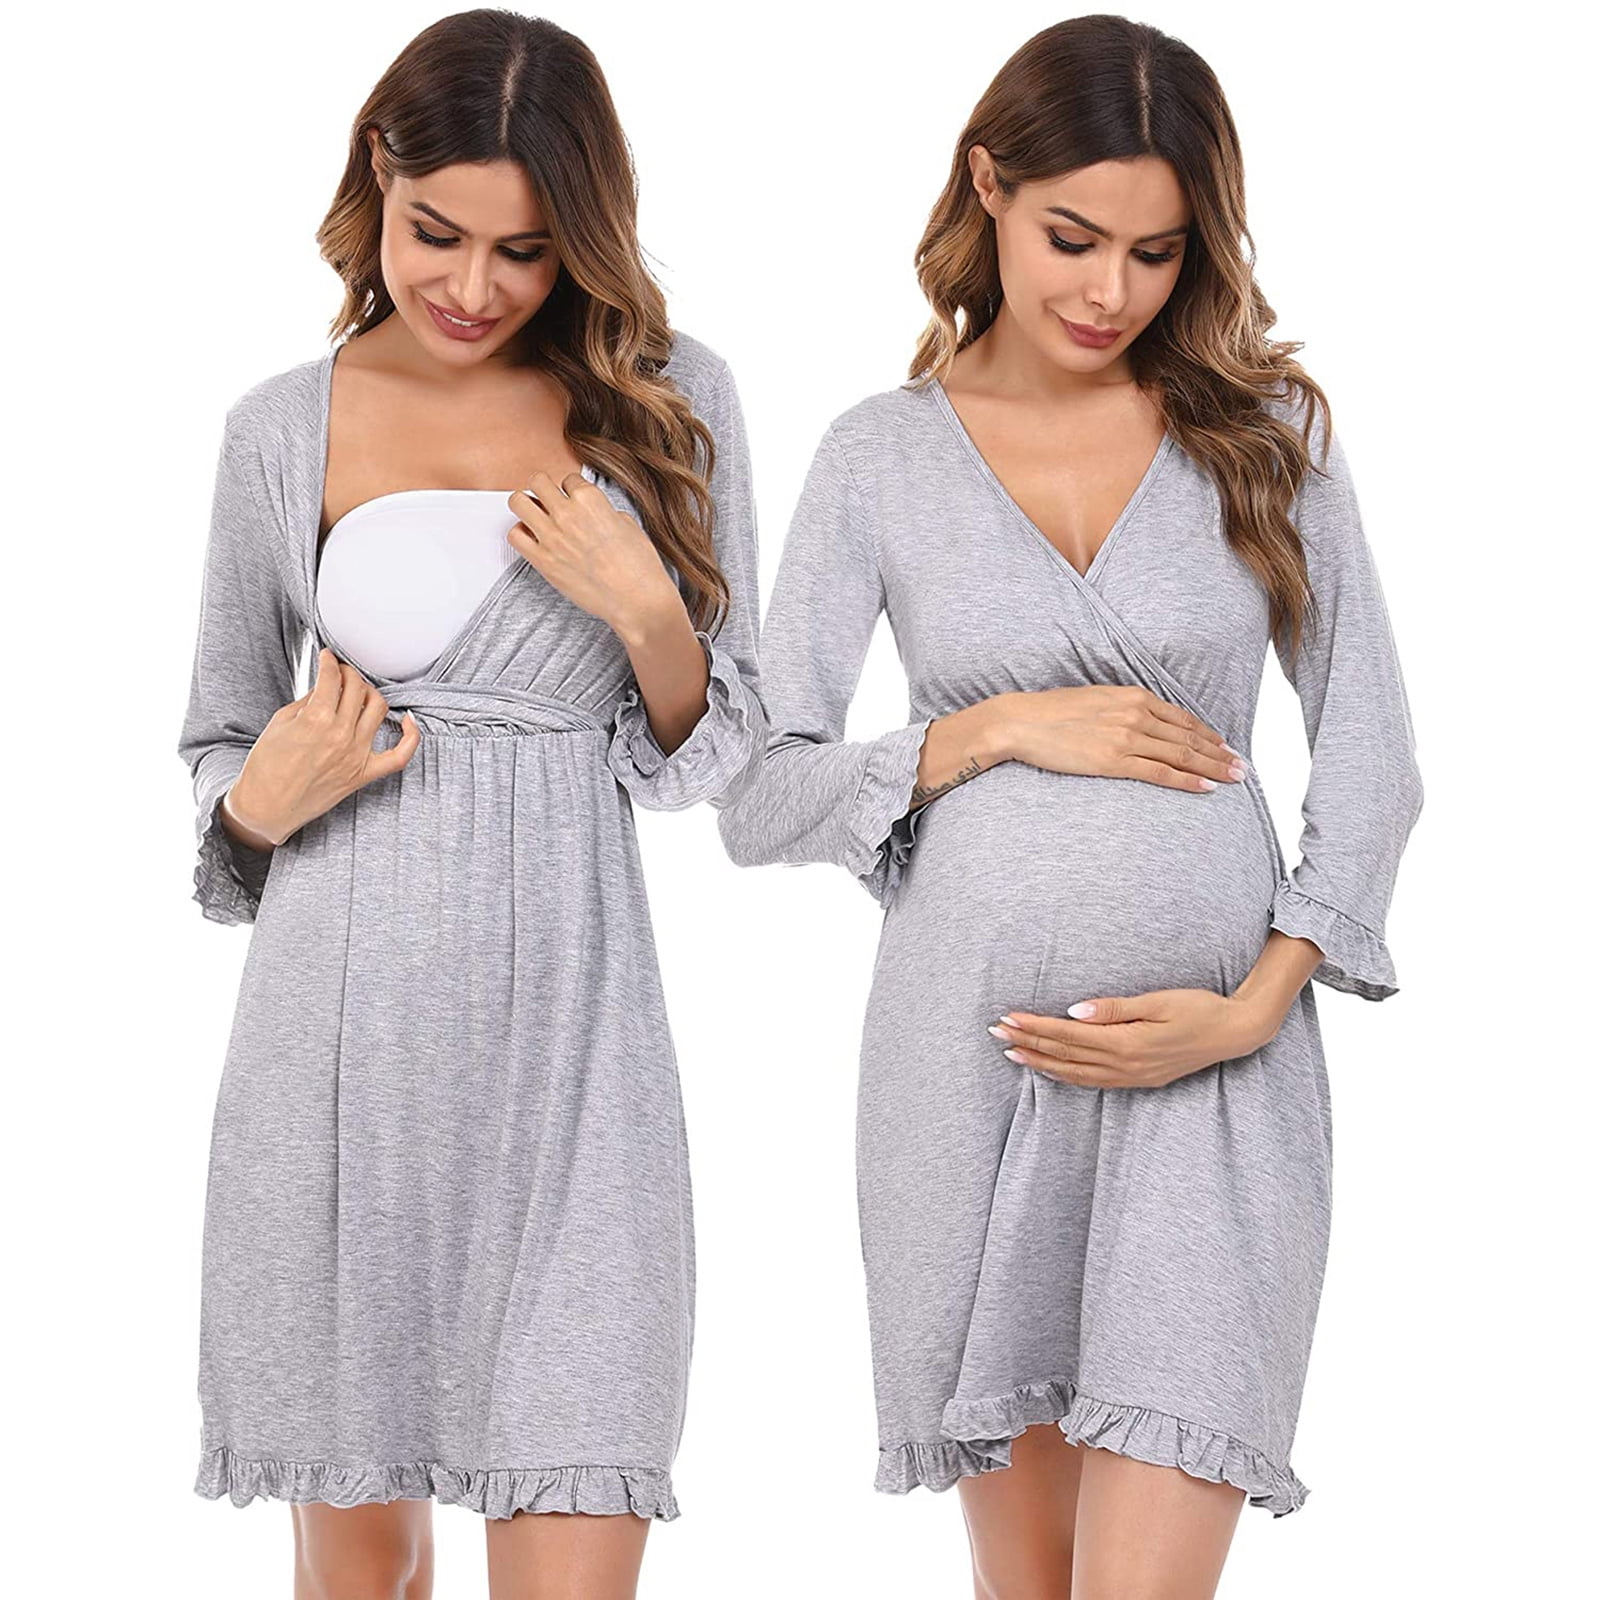 Women Maternity Nursing Clothes for Breastfeeding Half Sleeve Pregnant lace Nightgown with Front Button 